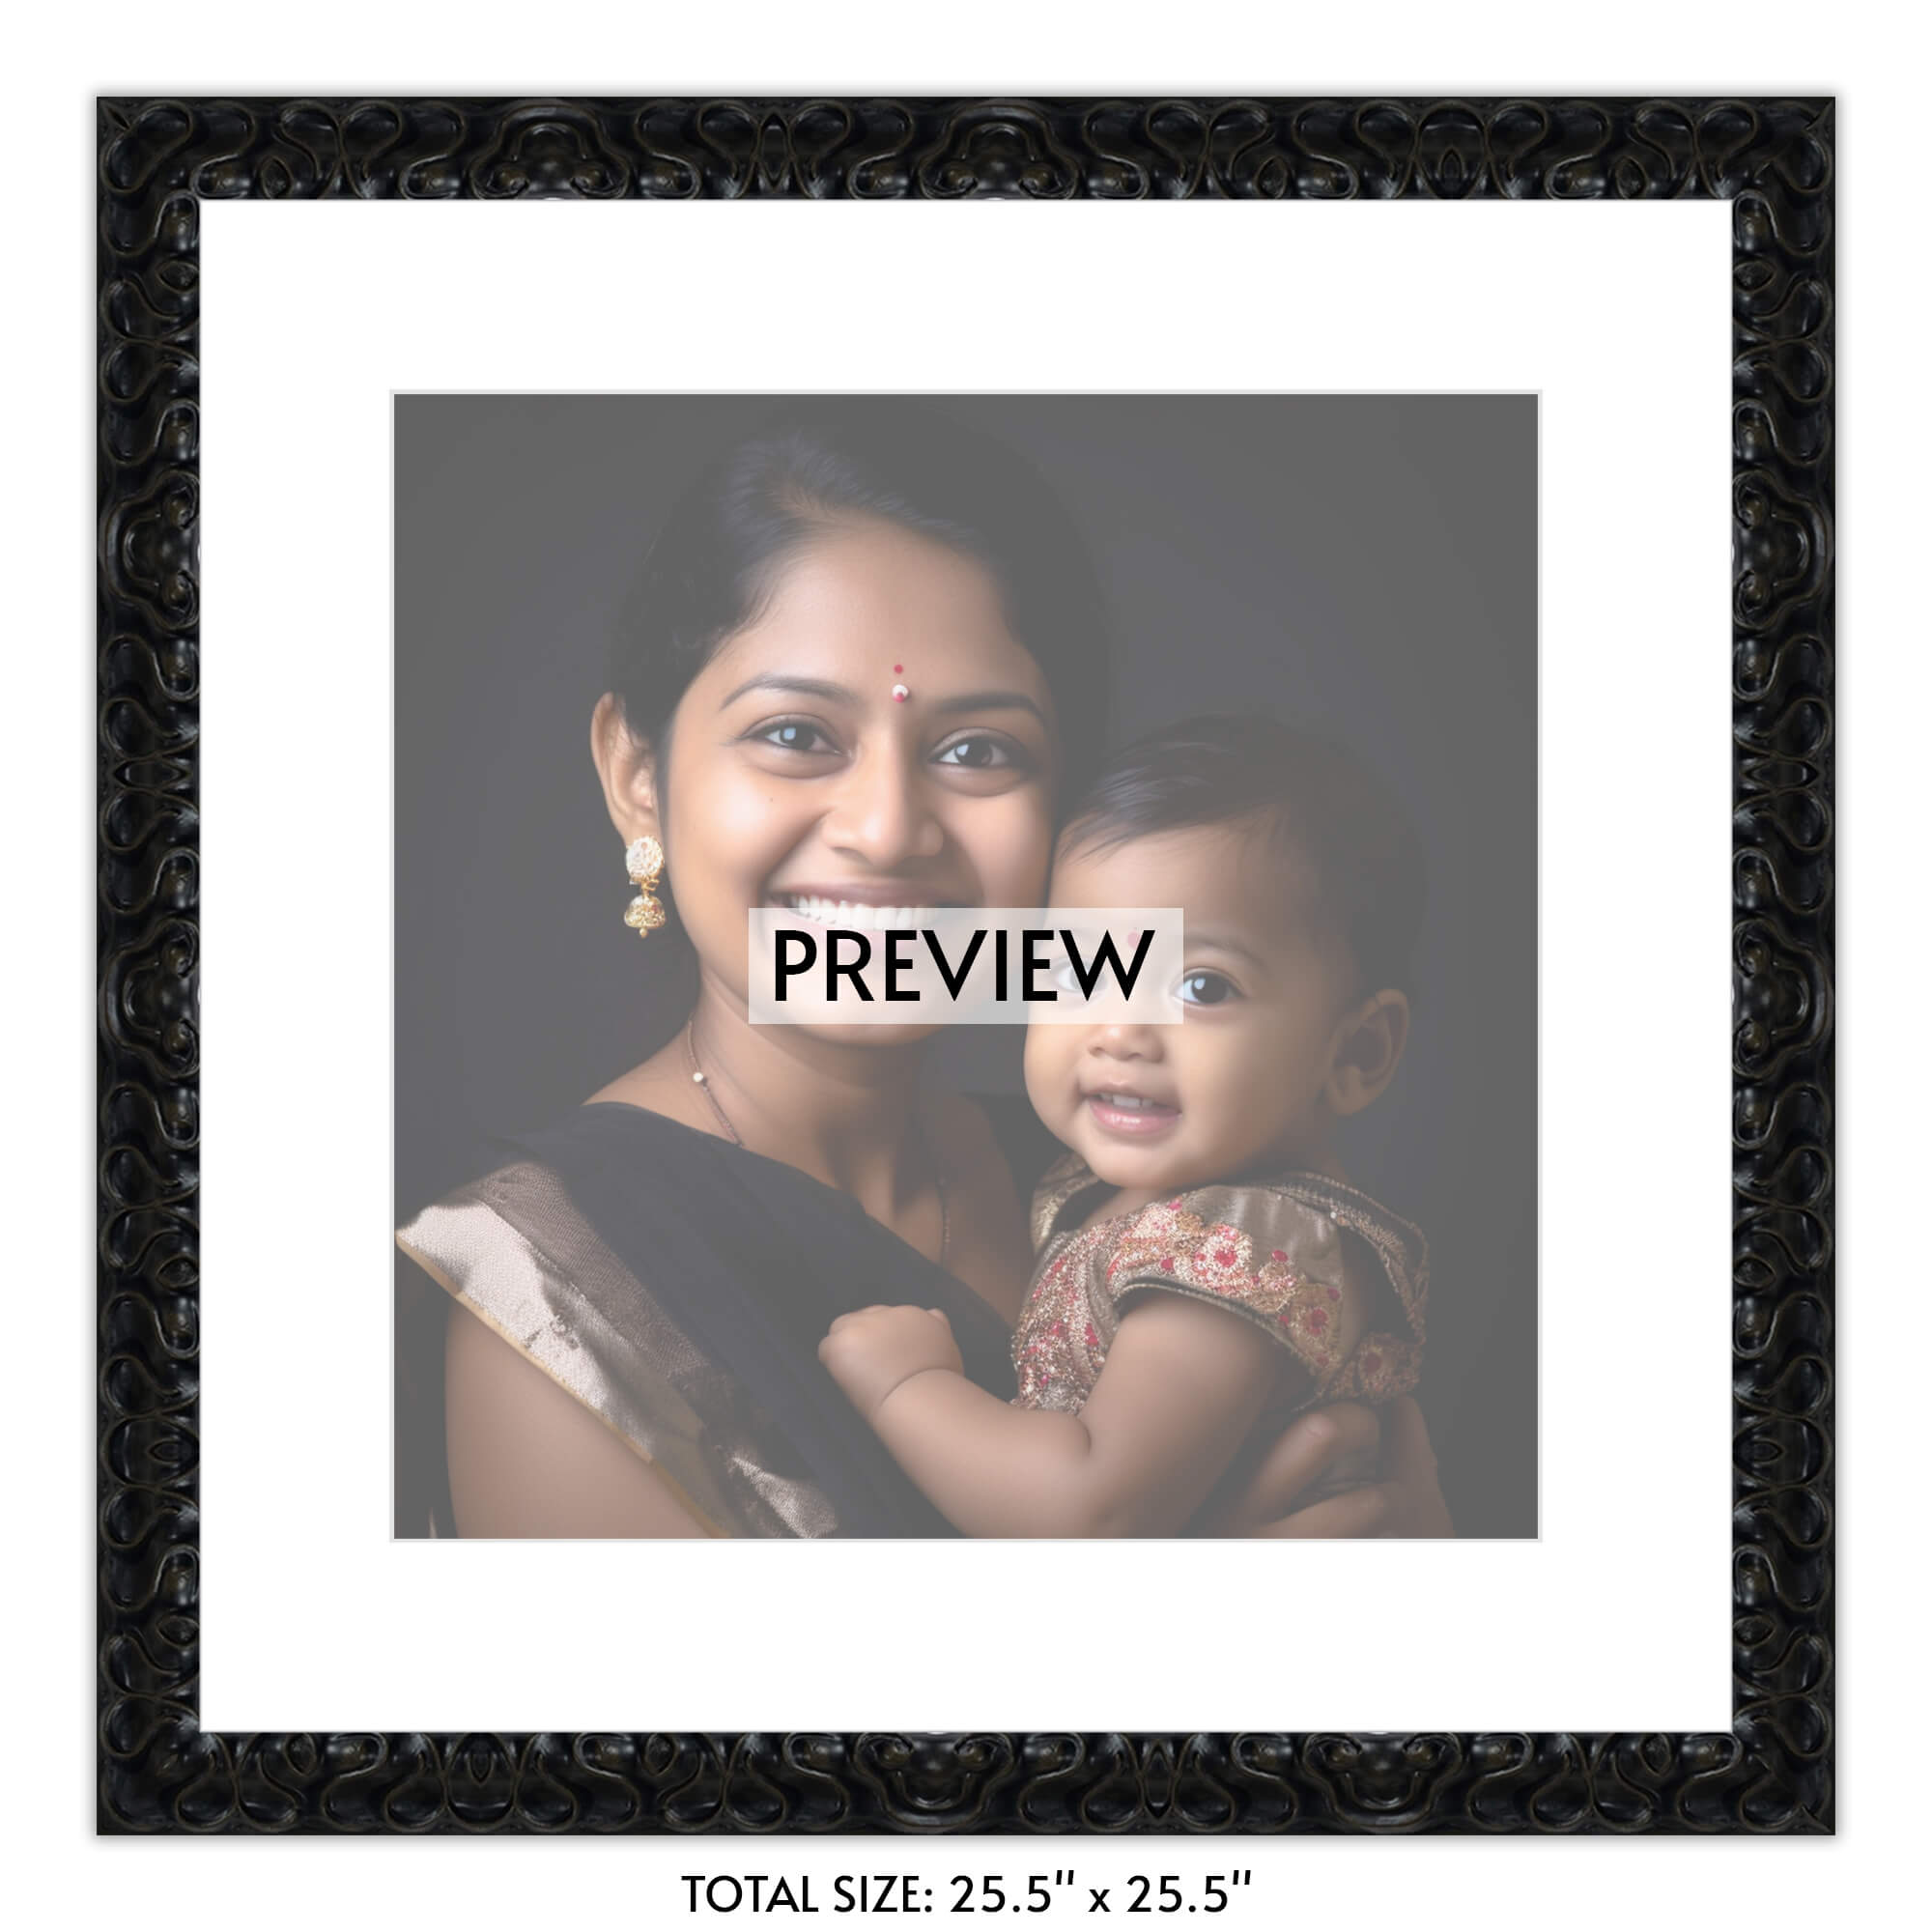 Large Frame - 17" x 17" Picture Size